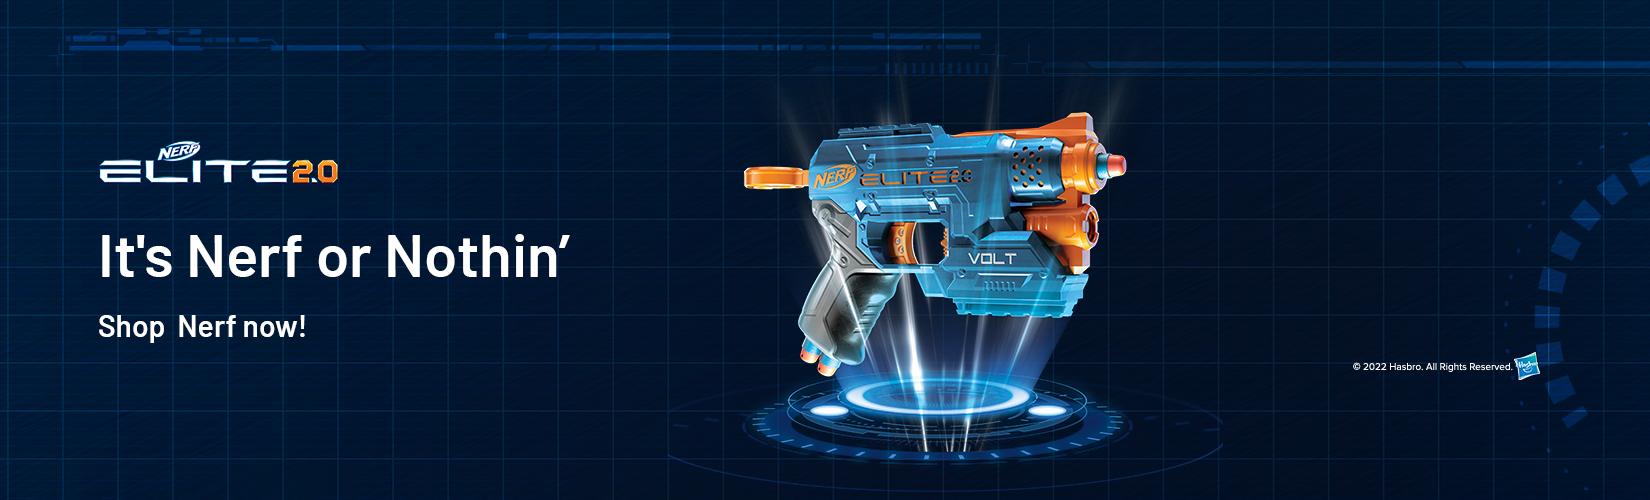 It's Nerf or Nothin'. Shop Nerf now!